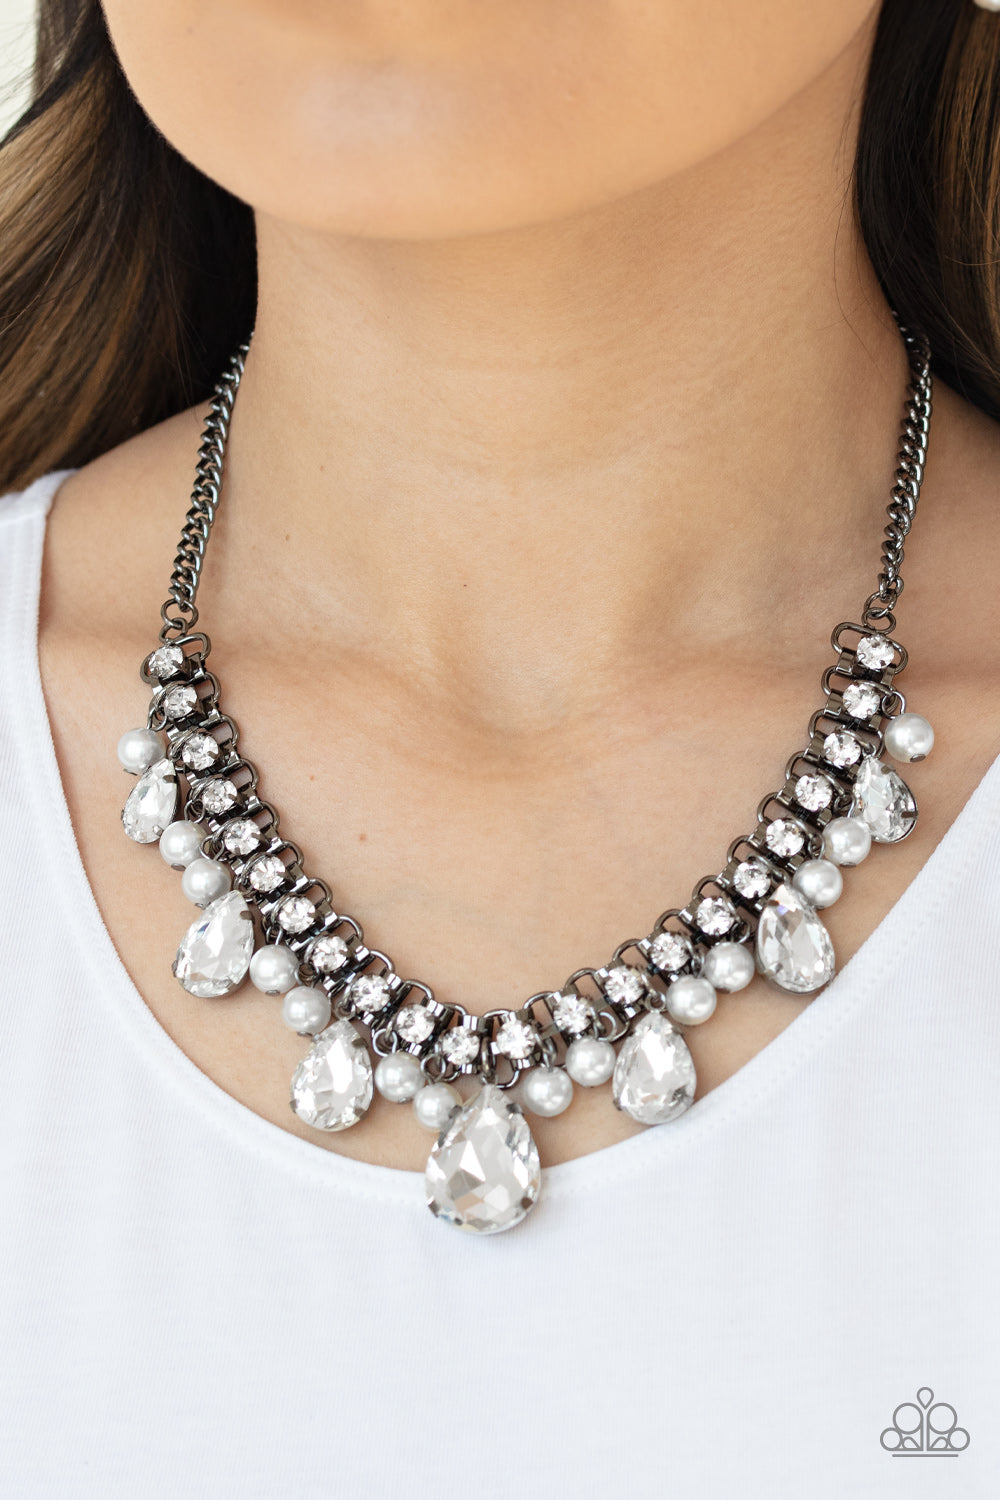 Paparazzi Necklace ~ Knockout Queen - Black Pearl Necklace